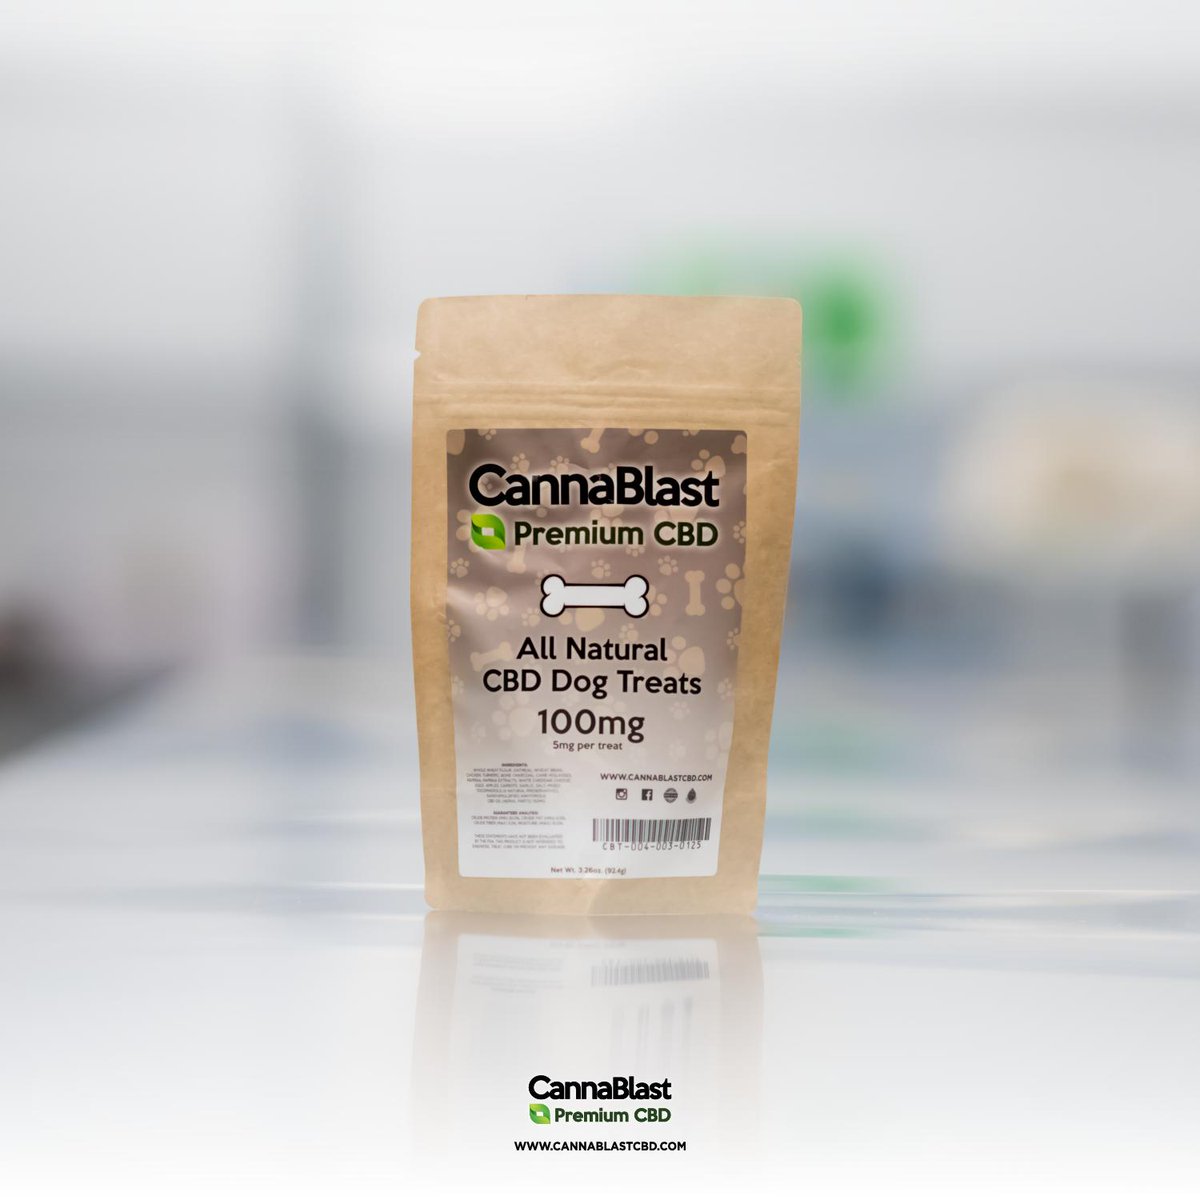 Premium CBD tinctures for your dog or cat now available in our online store. Also our great selection of items for you like the topical gel made with premium CBD.

#topicalgel #dogs #cats